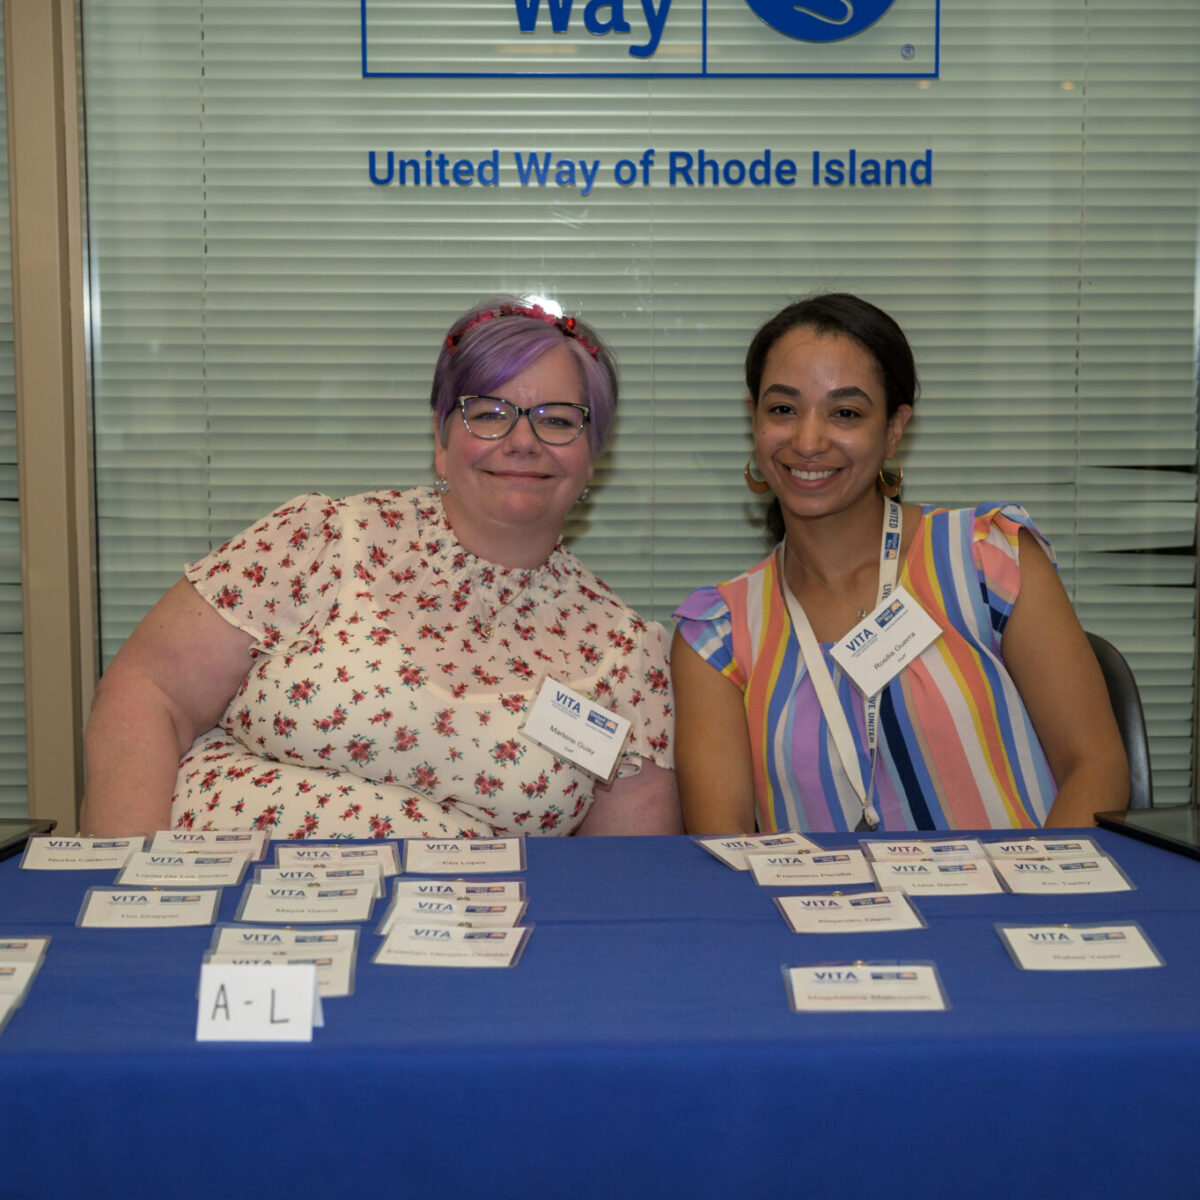 Marlene Guay and Rosilia Guerra pose behind a table with name tags.